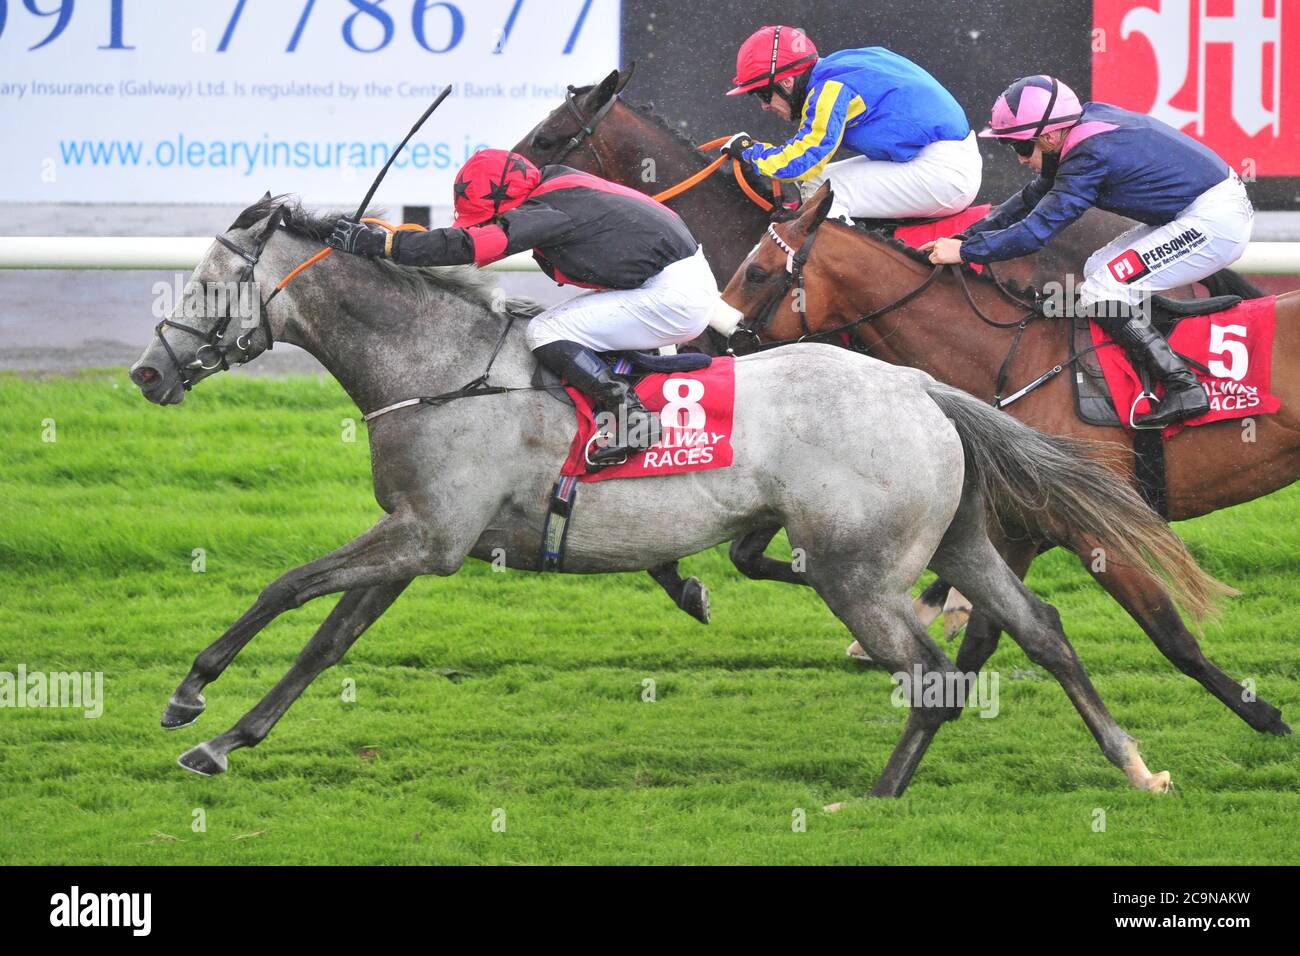 Sirjack Thomas ridden by Gavin Ryan (left) wins The O'Leary Insurances Handicap during day six of the 2020 Galway Races Summer Festival at Galway Racecourse. Stock Photo